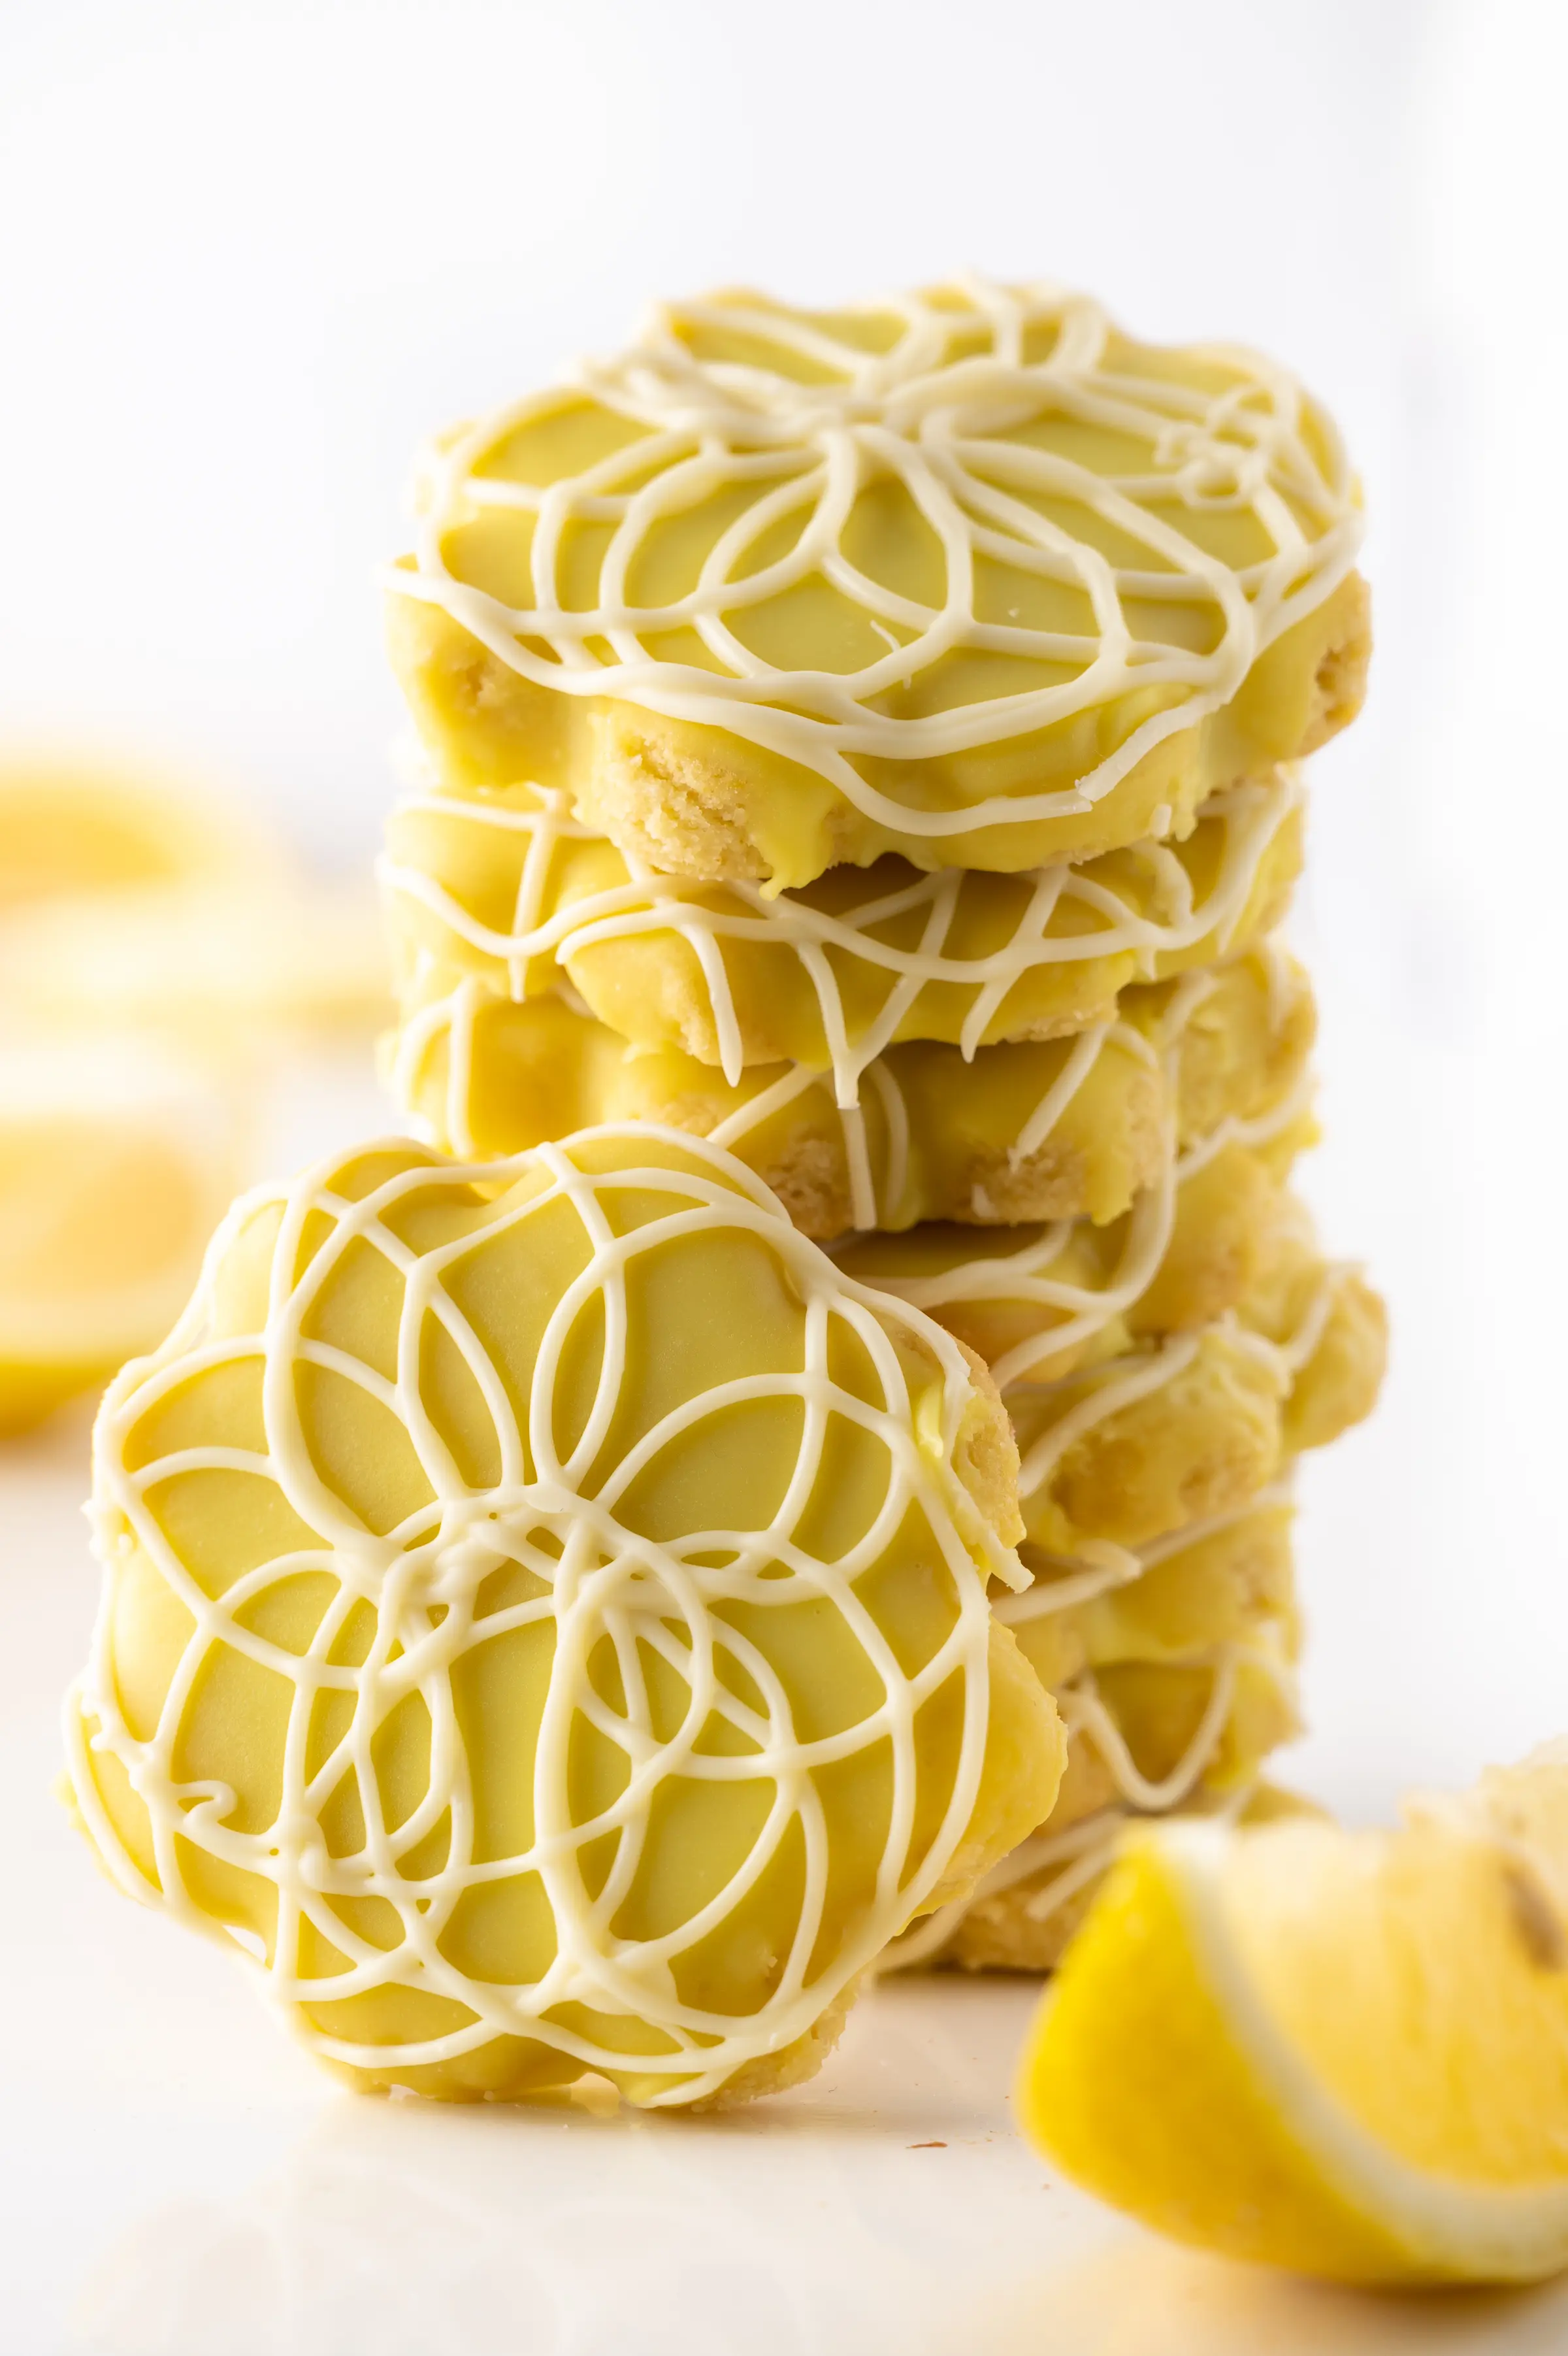 A stack of low carb lemon cookies on againss a bright white background. 